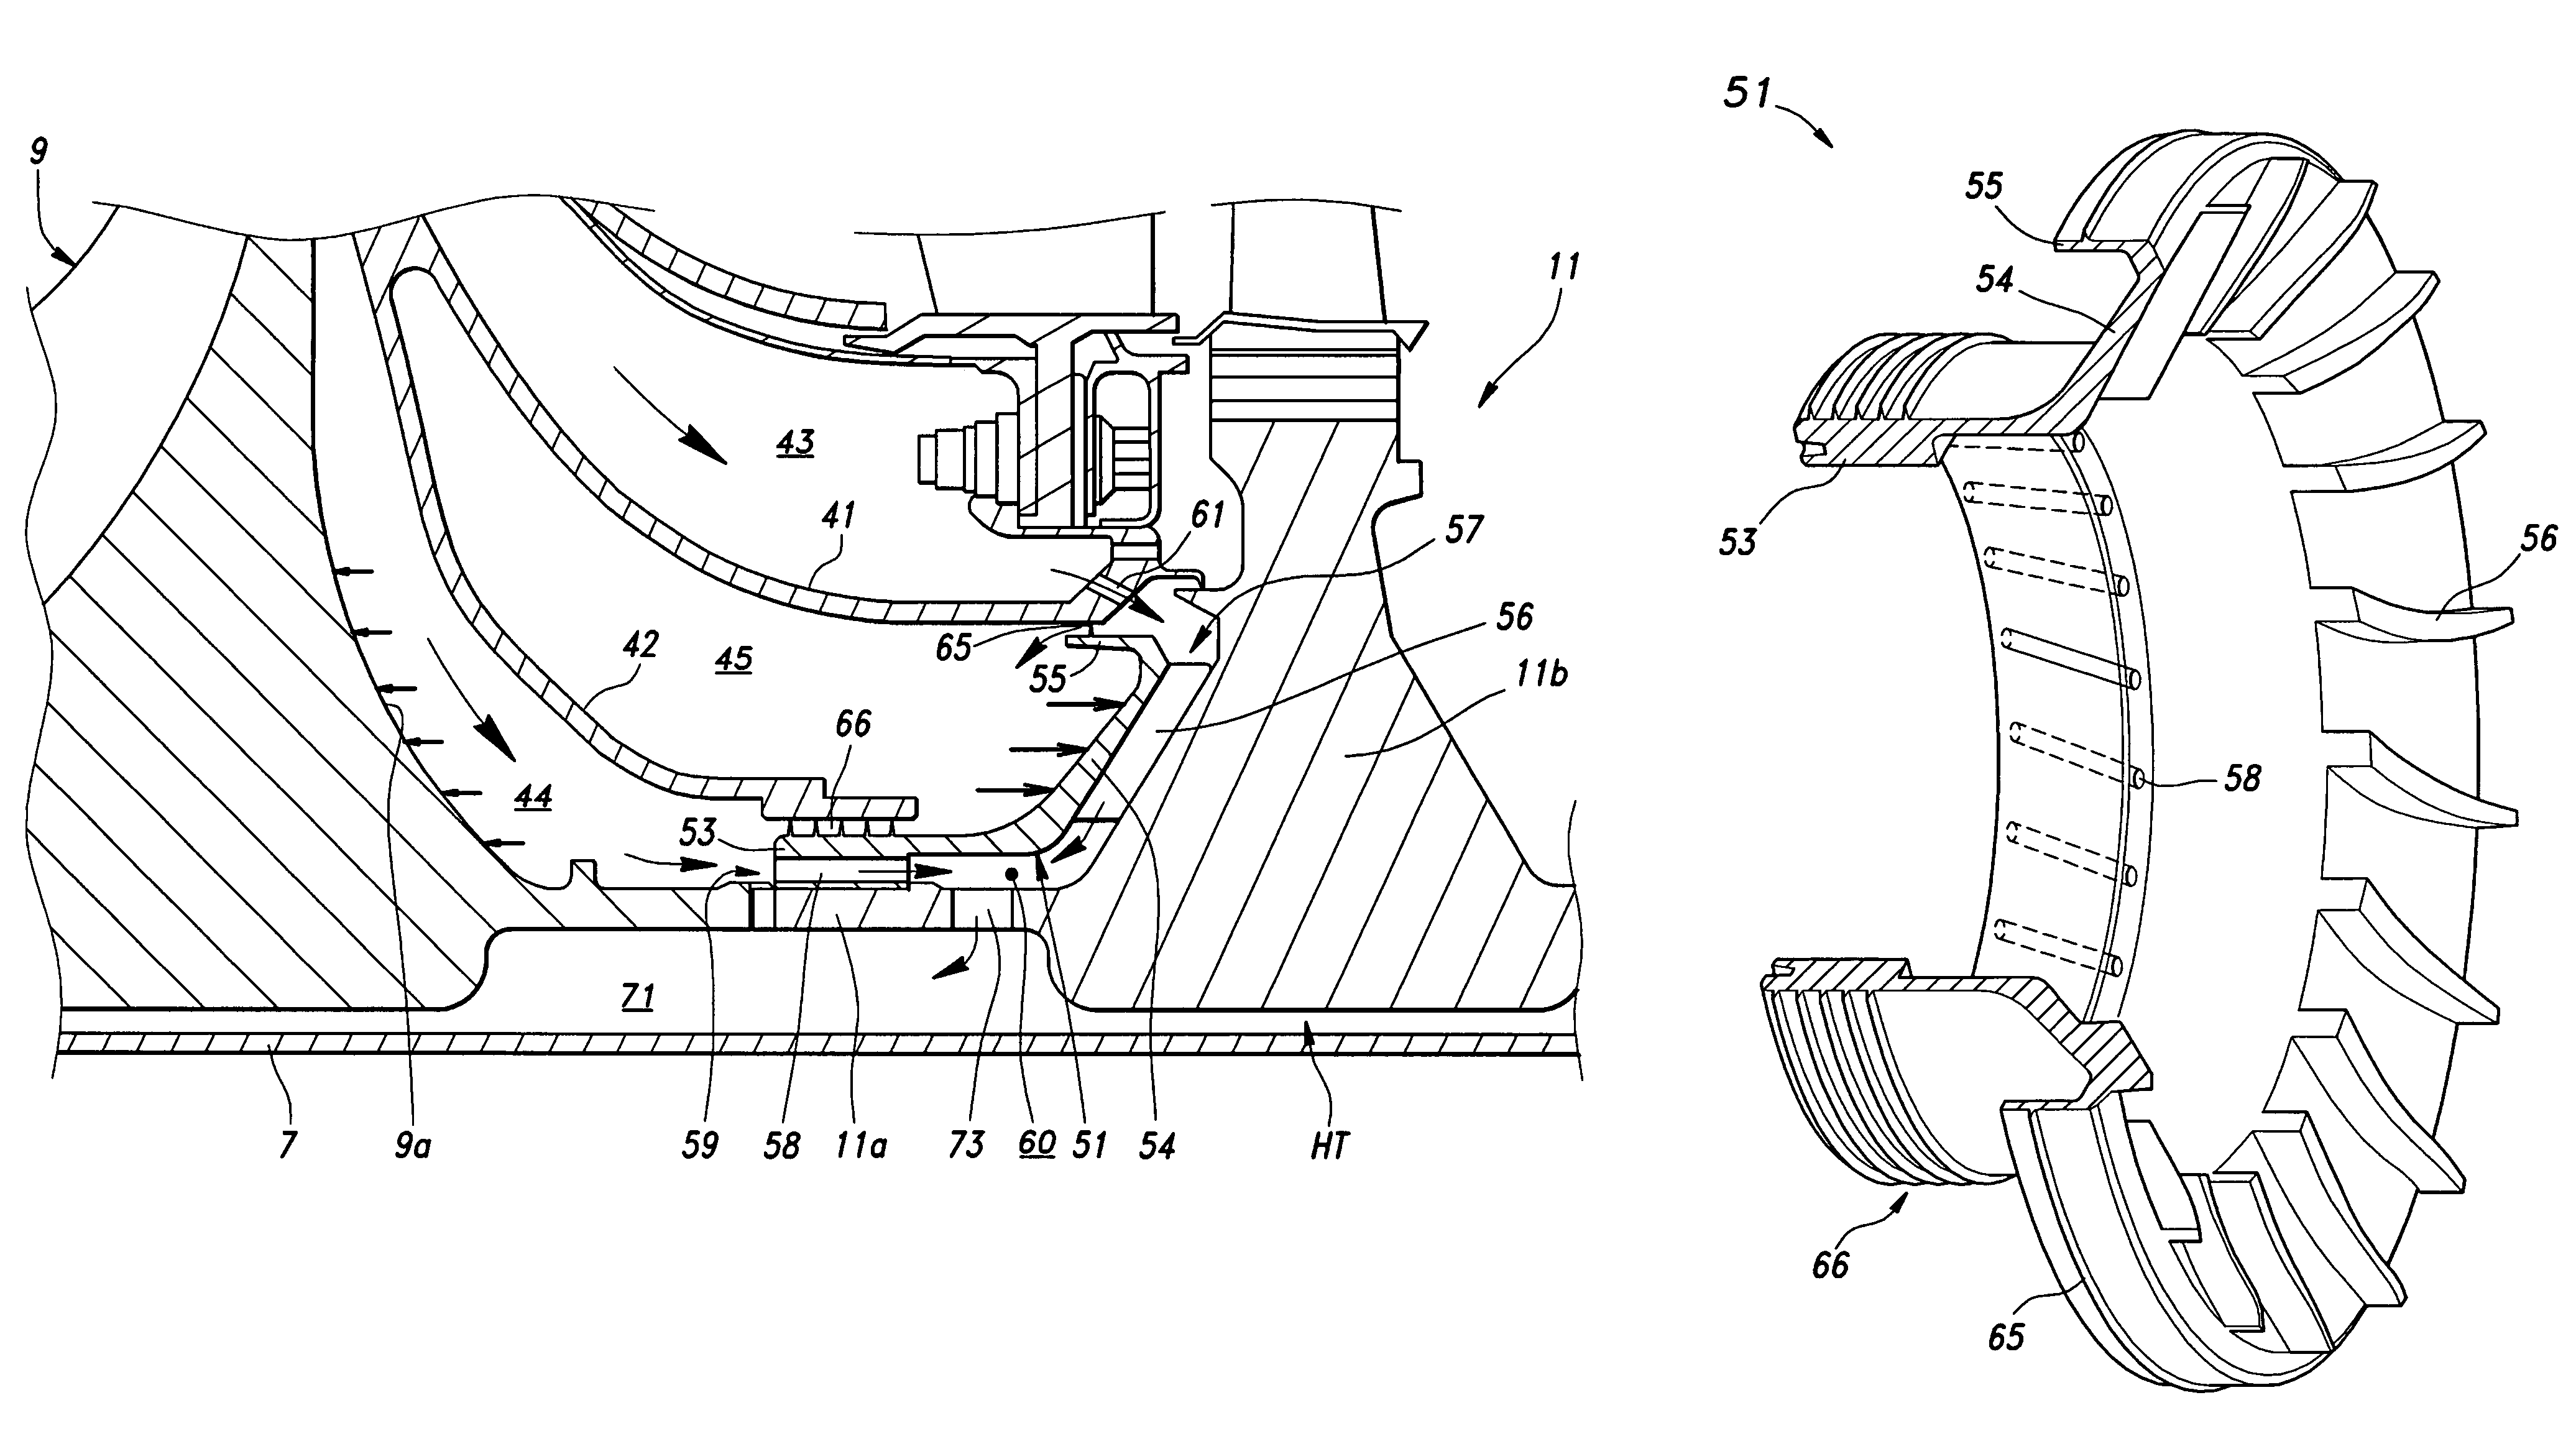 Device for supplying secondary air in a gas turbine engine